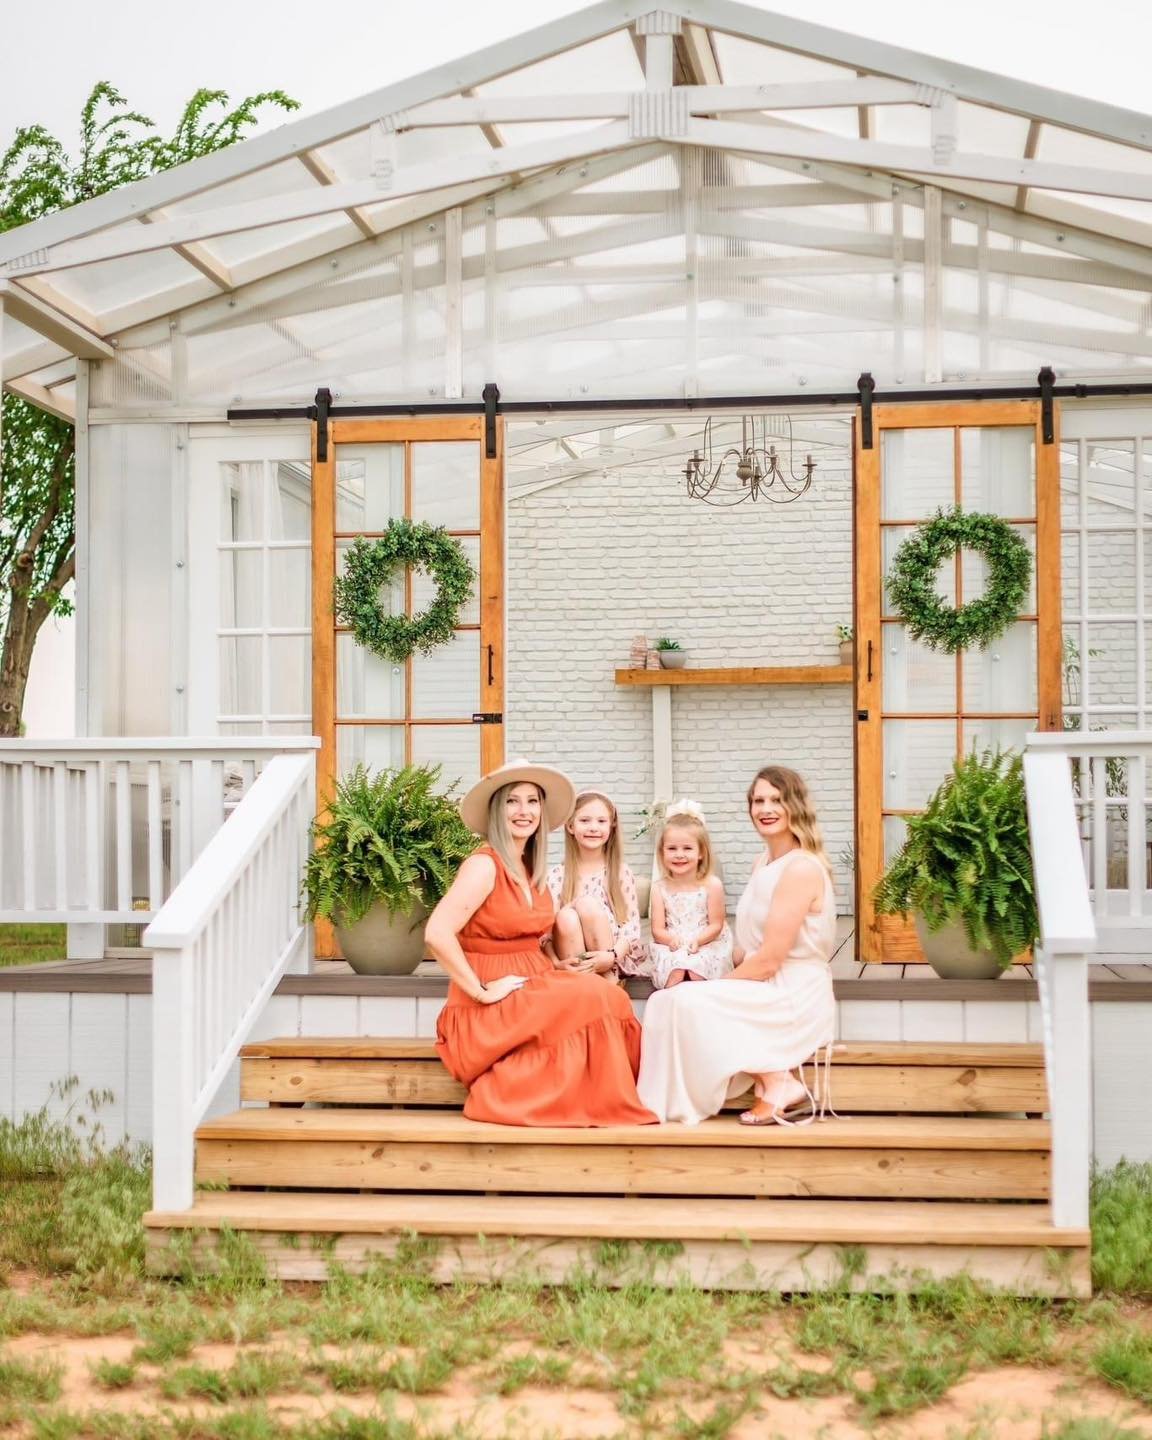 🌸 Don't miss out on your last chance to book our Spring Mini session! 🌿 Join us this Saturday at the exclusive Greenhouse in Tuttle for a truly unique photo experience. Capture the beauty of the season in a special location that's privately owned. 